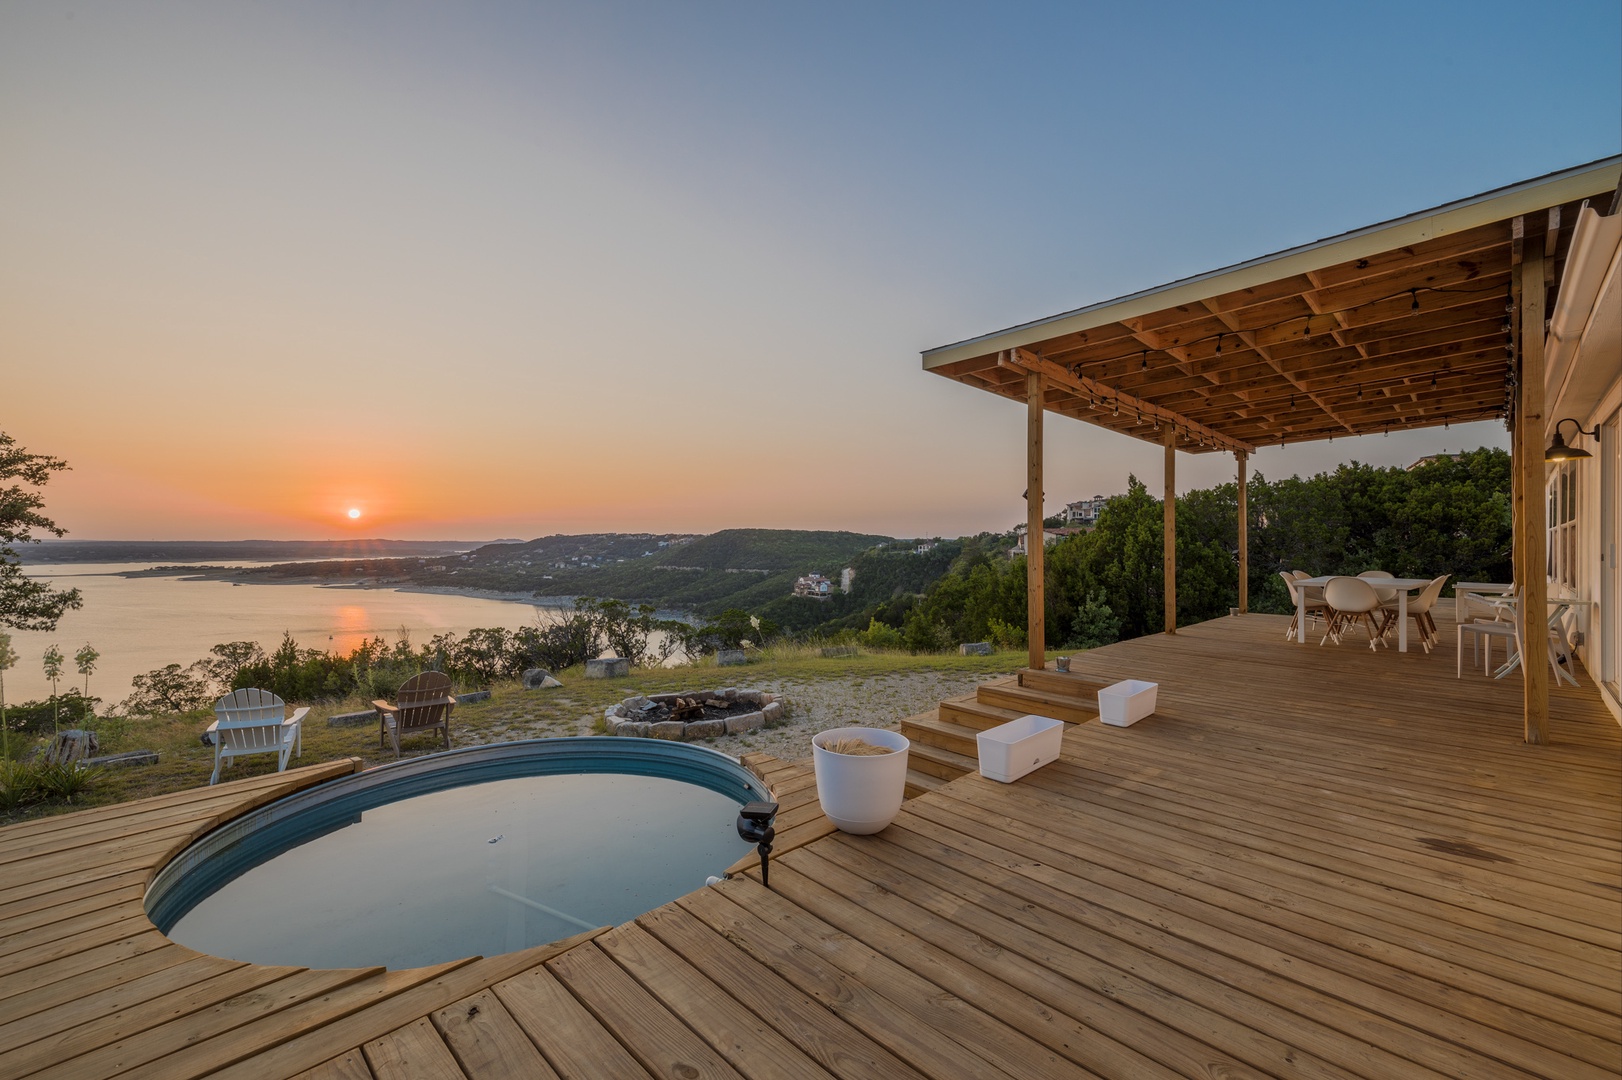 Get ready for fantastic fun and sunsets overlooking Lake Travis. Welcome to the Bungalow at the Oasis, TX (OTX Bungalow)!